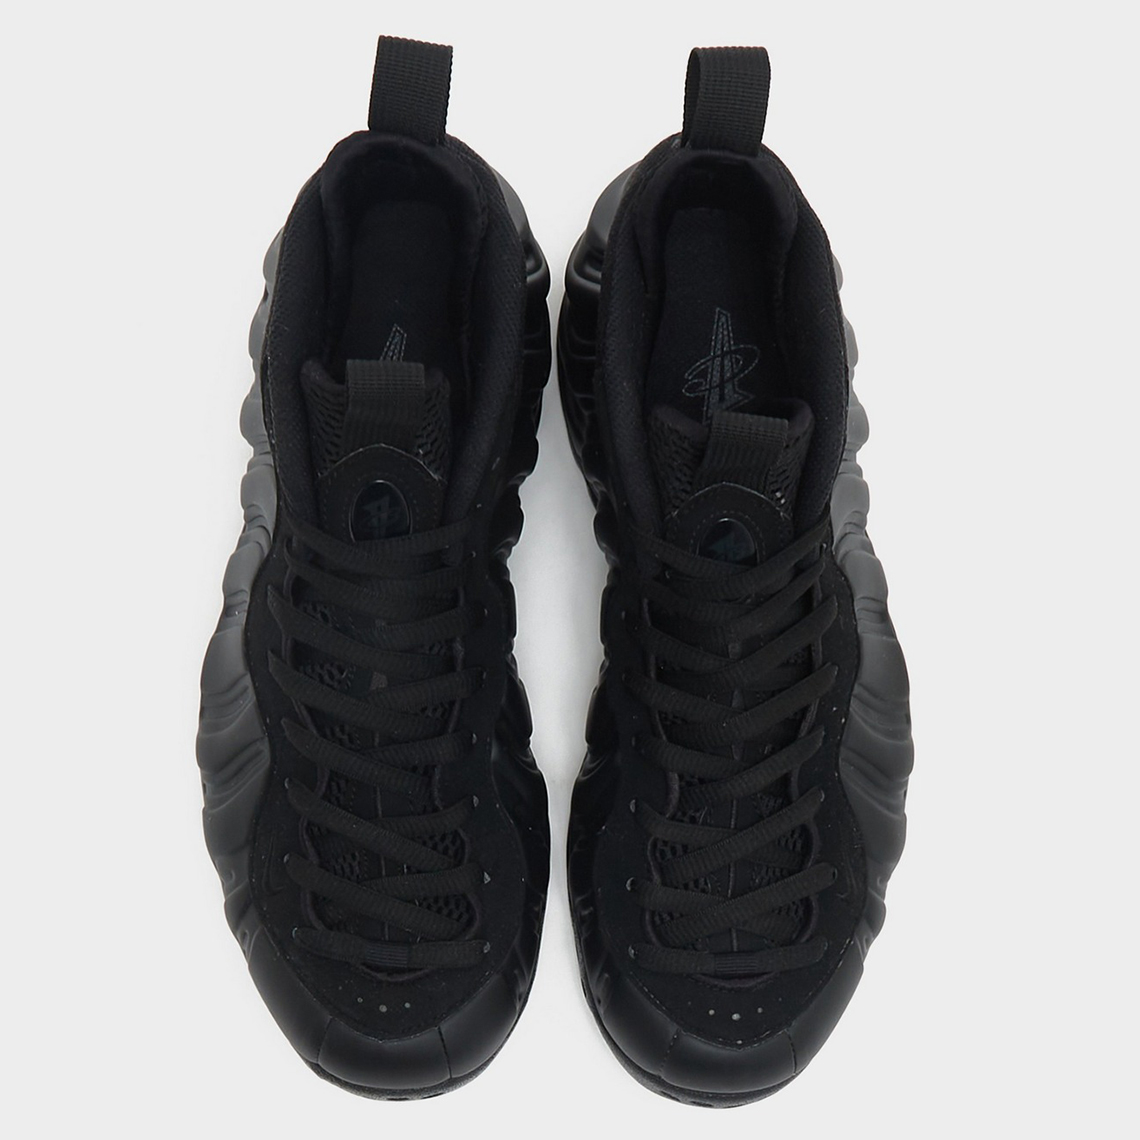 Nike Air Foamposite One Black Anthracite Fd5855 001 Release Date 1